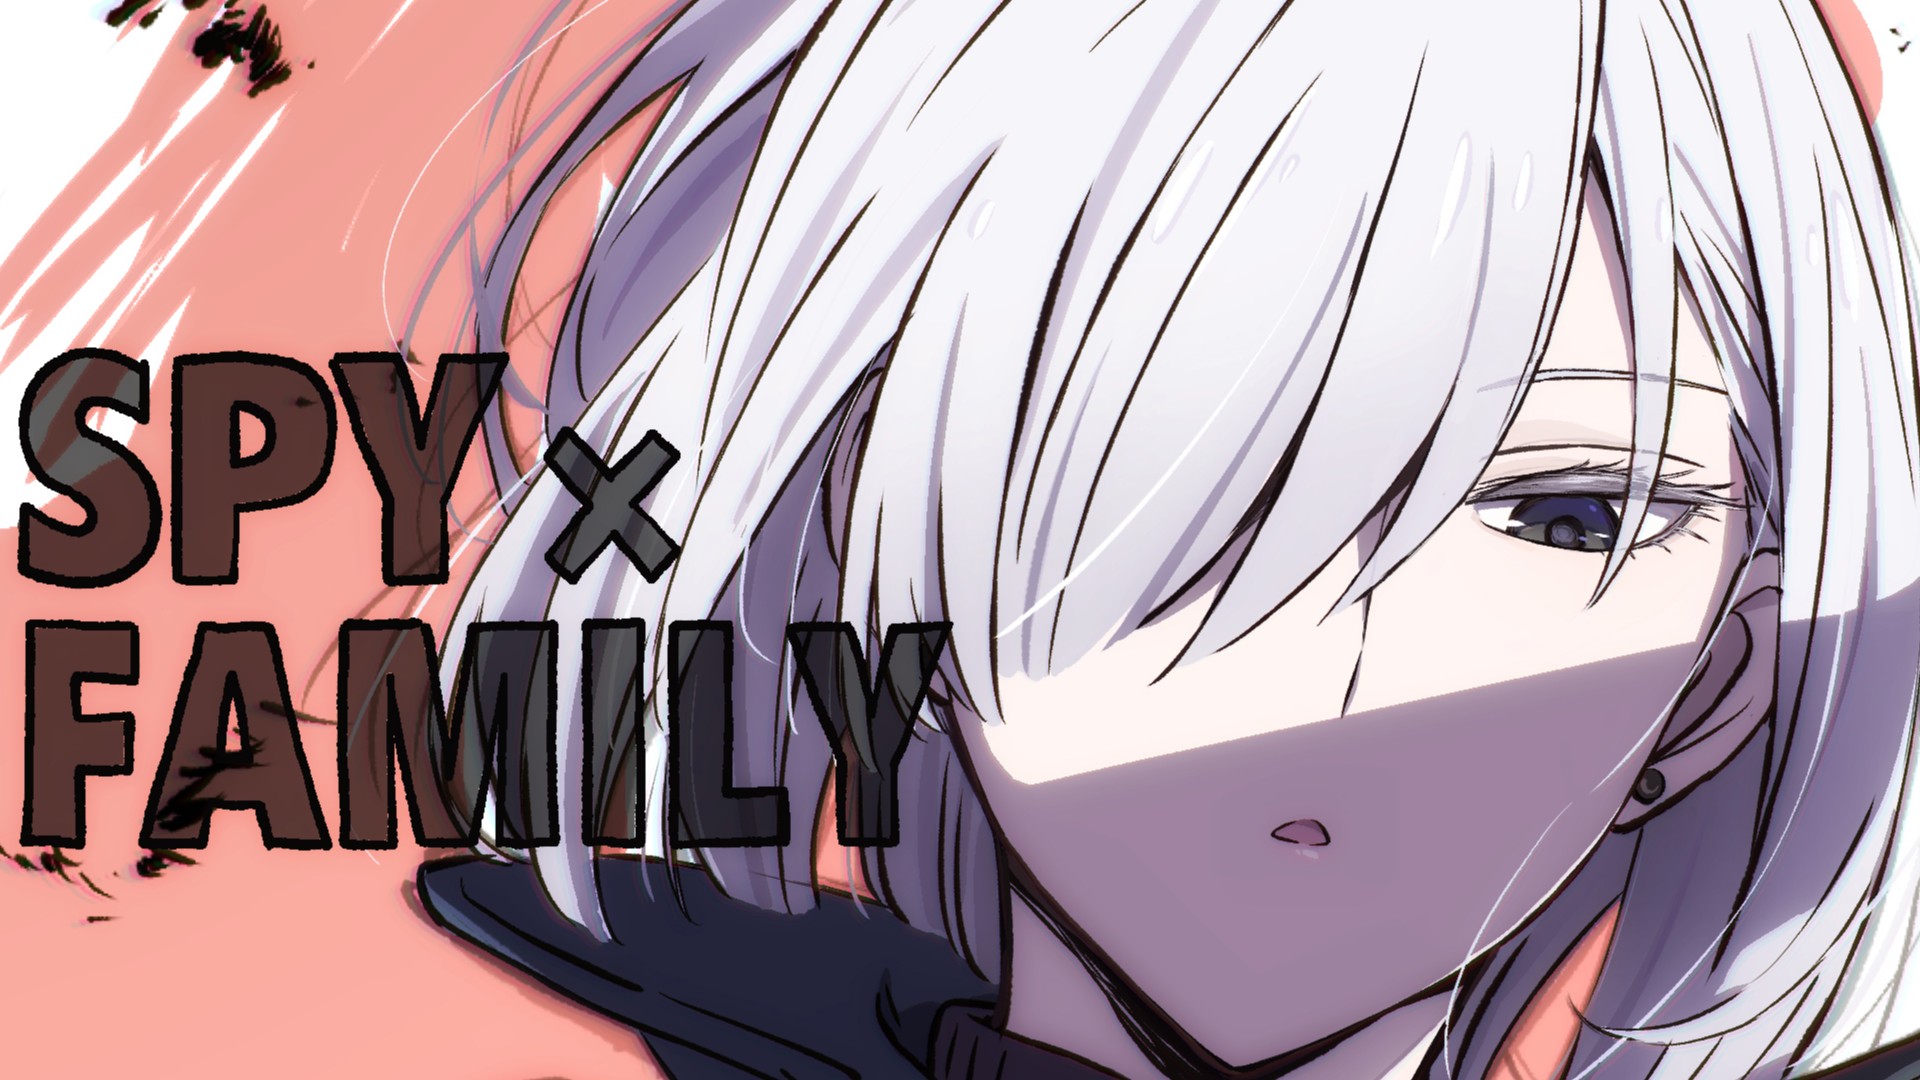 Spy x Family Anime Part 2 Countdown Introduces Fiona Frost - Anime Corner